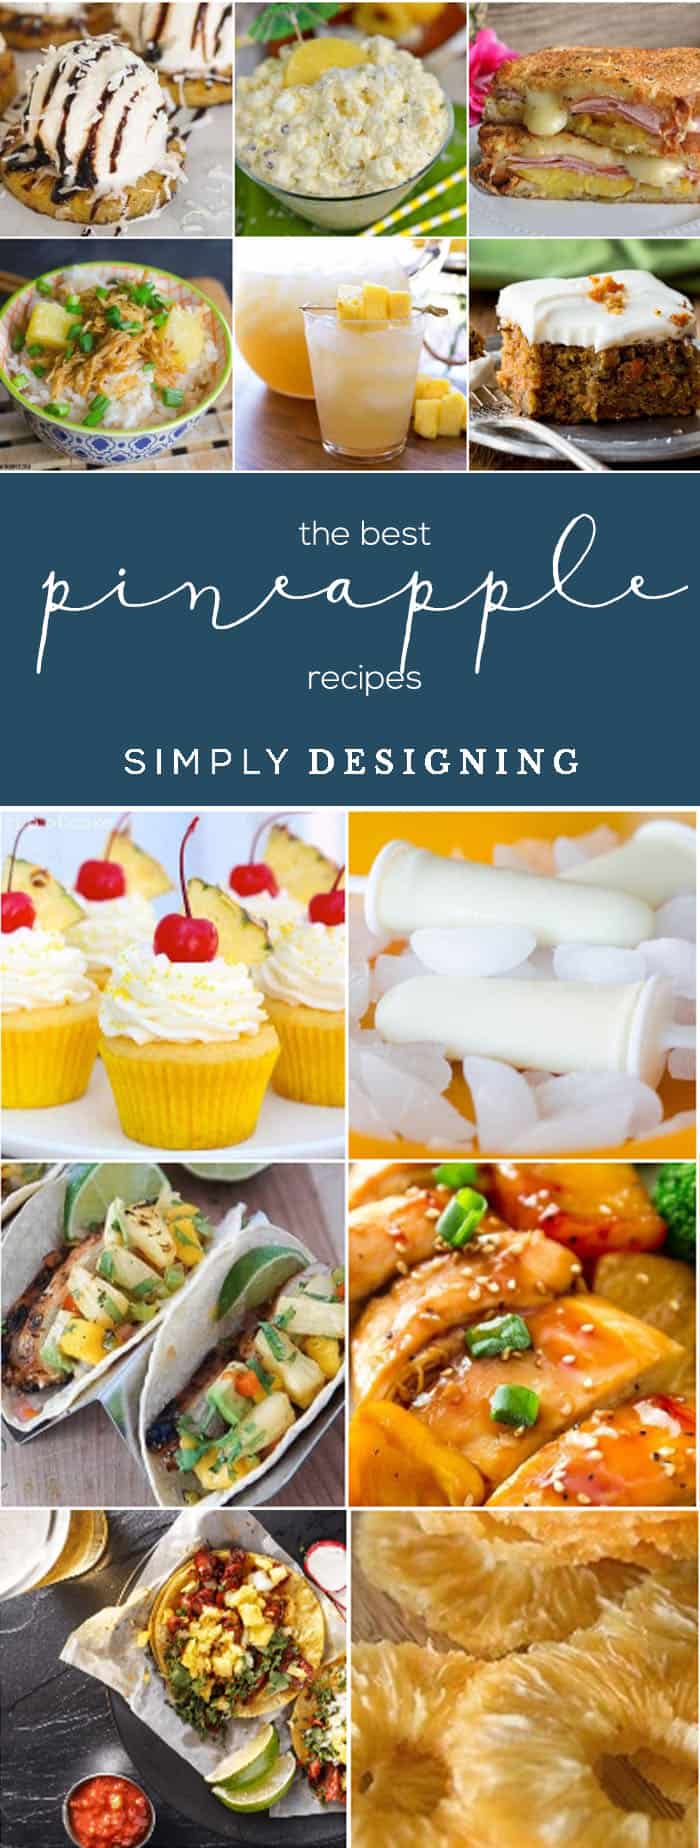 the best pineapple recipes pin 25+ Pineapple Recipes for the Perfect Summer Treat 33 key lime pie pop